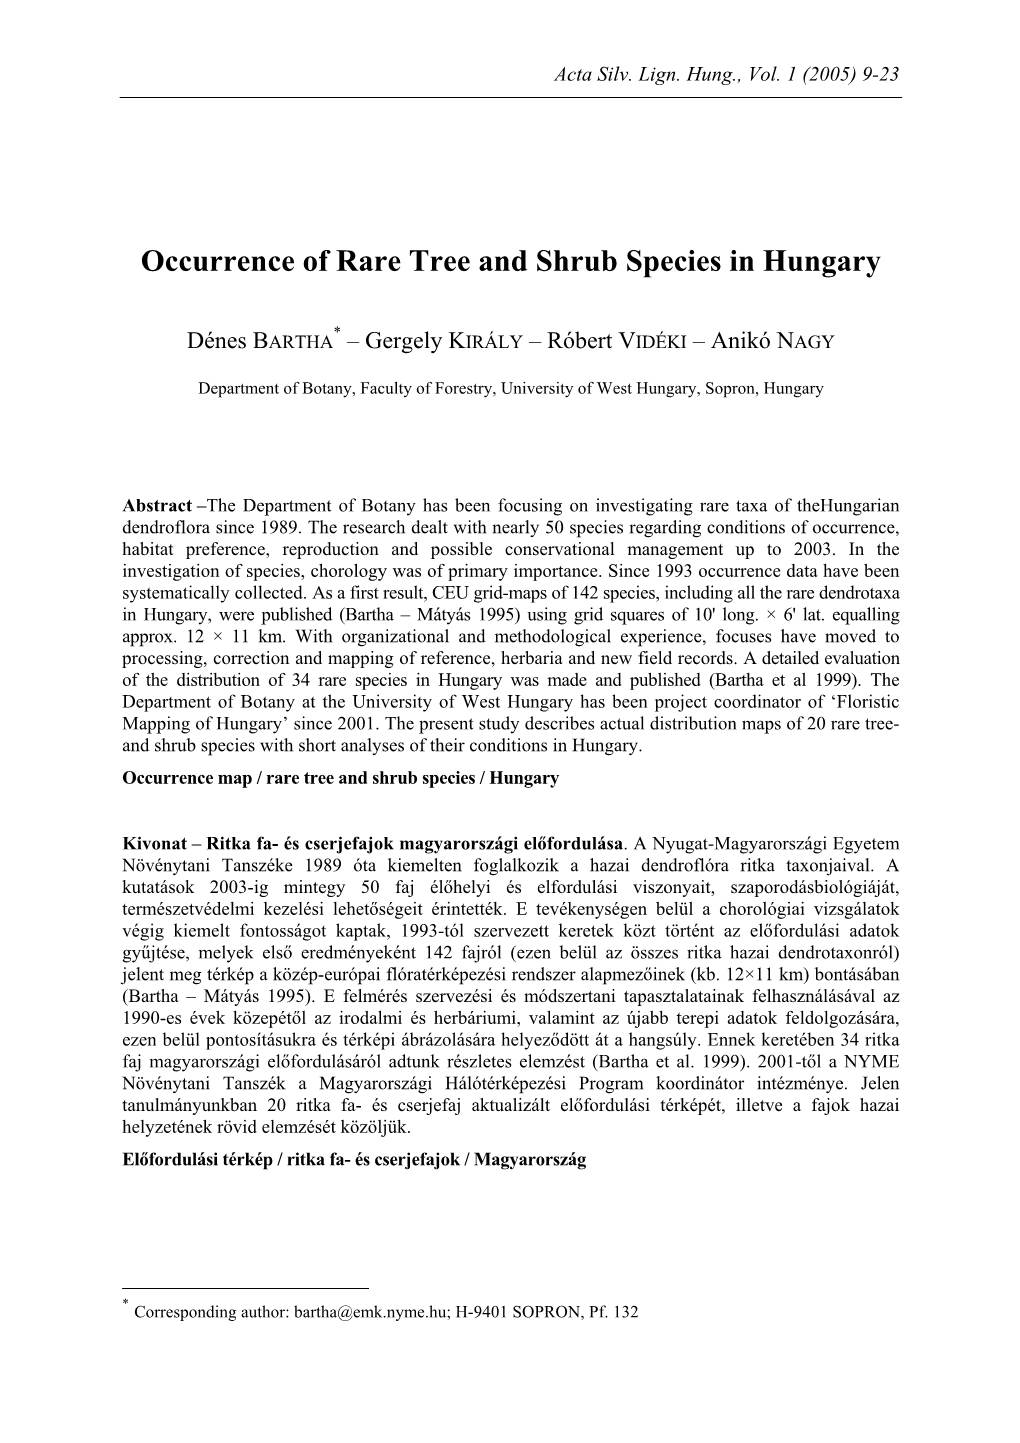 Occurrence of Rare Tree and Shrub Species in Hungary